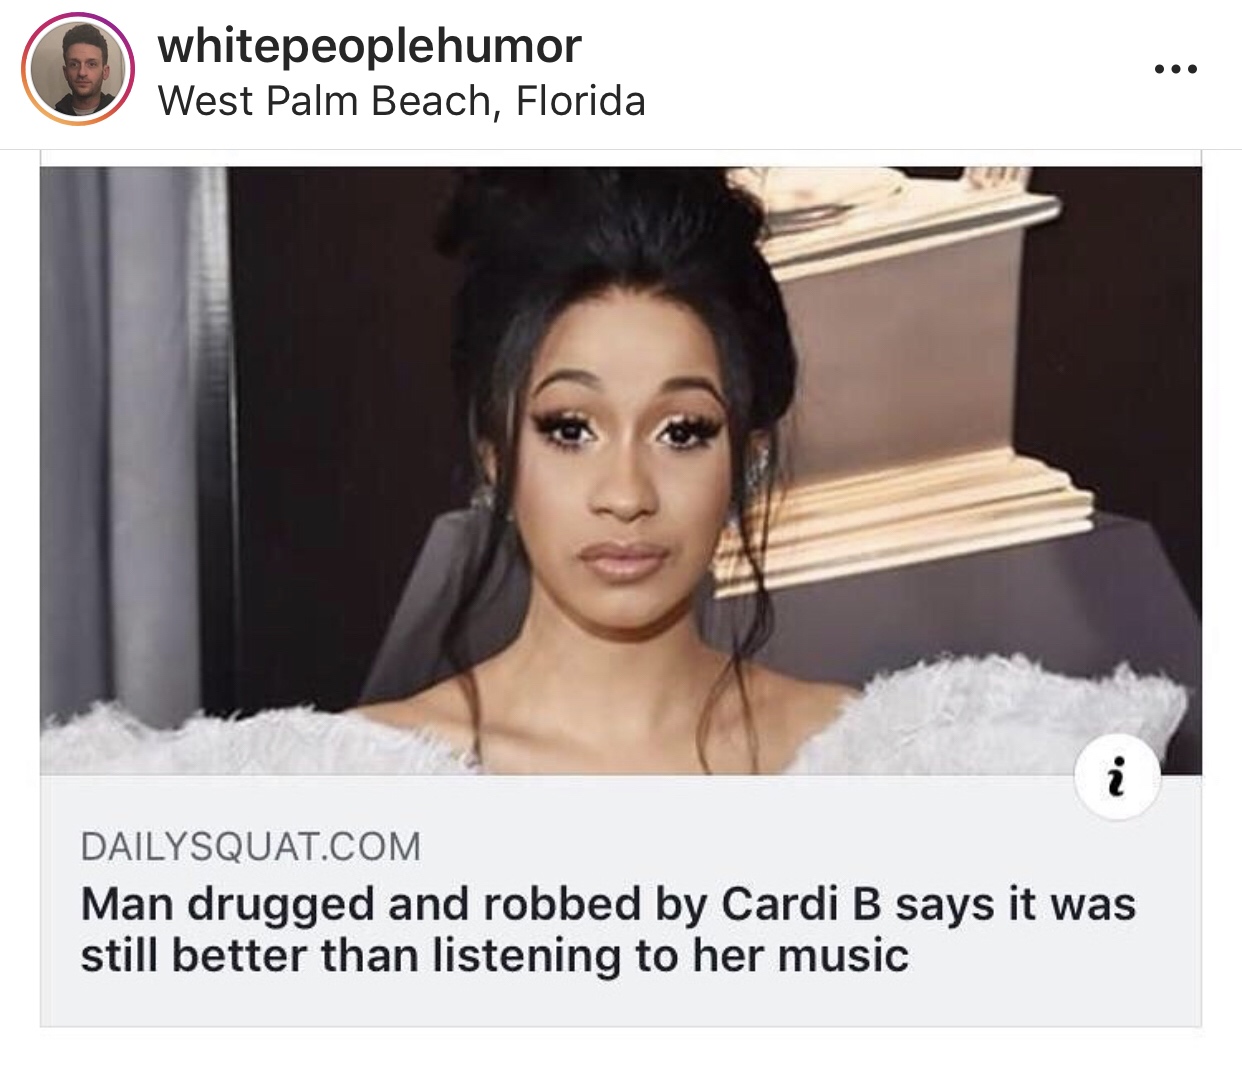 man drugged and robbed by cardi b says it was still better than listening to her music - whitepeoplehumor West Palm Beach, Florida Dailysquat.Com Man drugged and robbed by Cardi B says it was still better than listening to her music